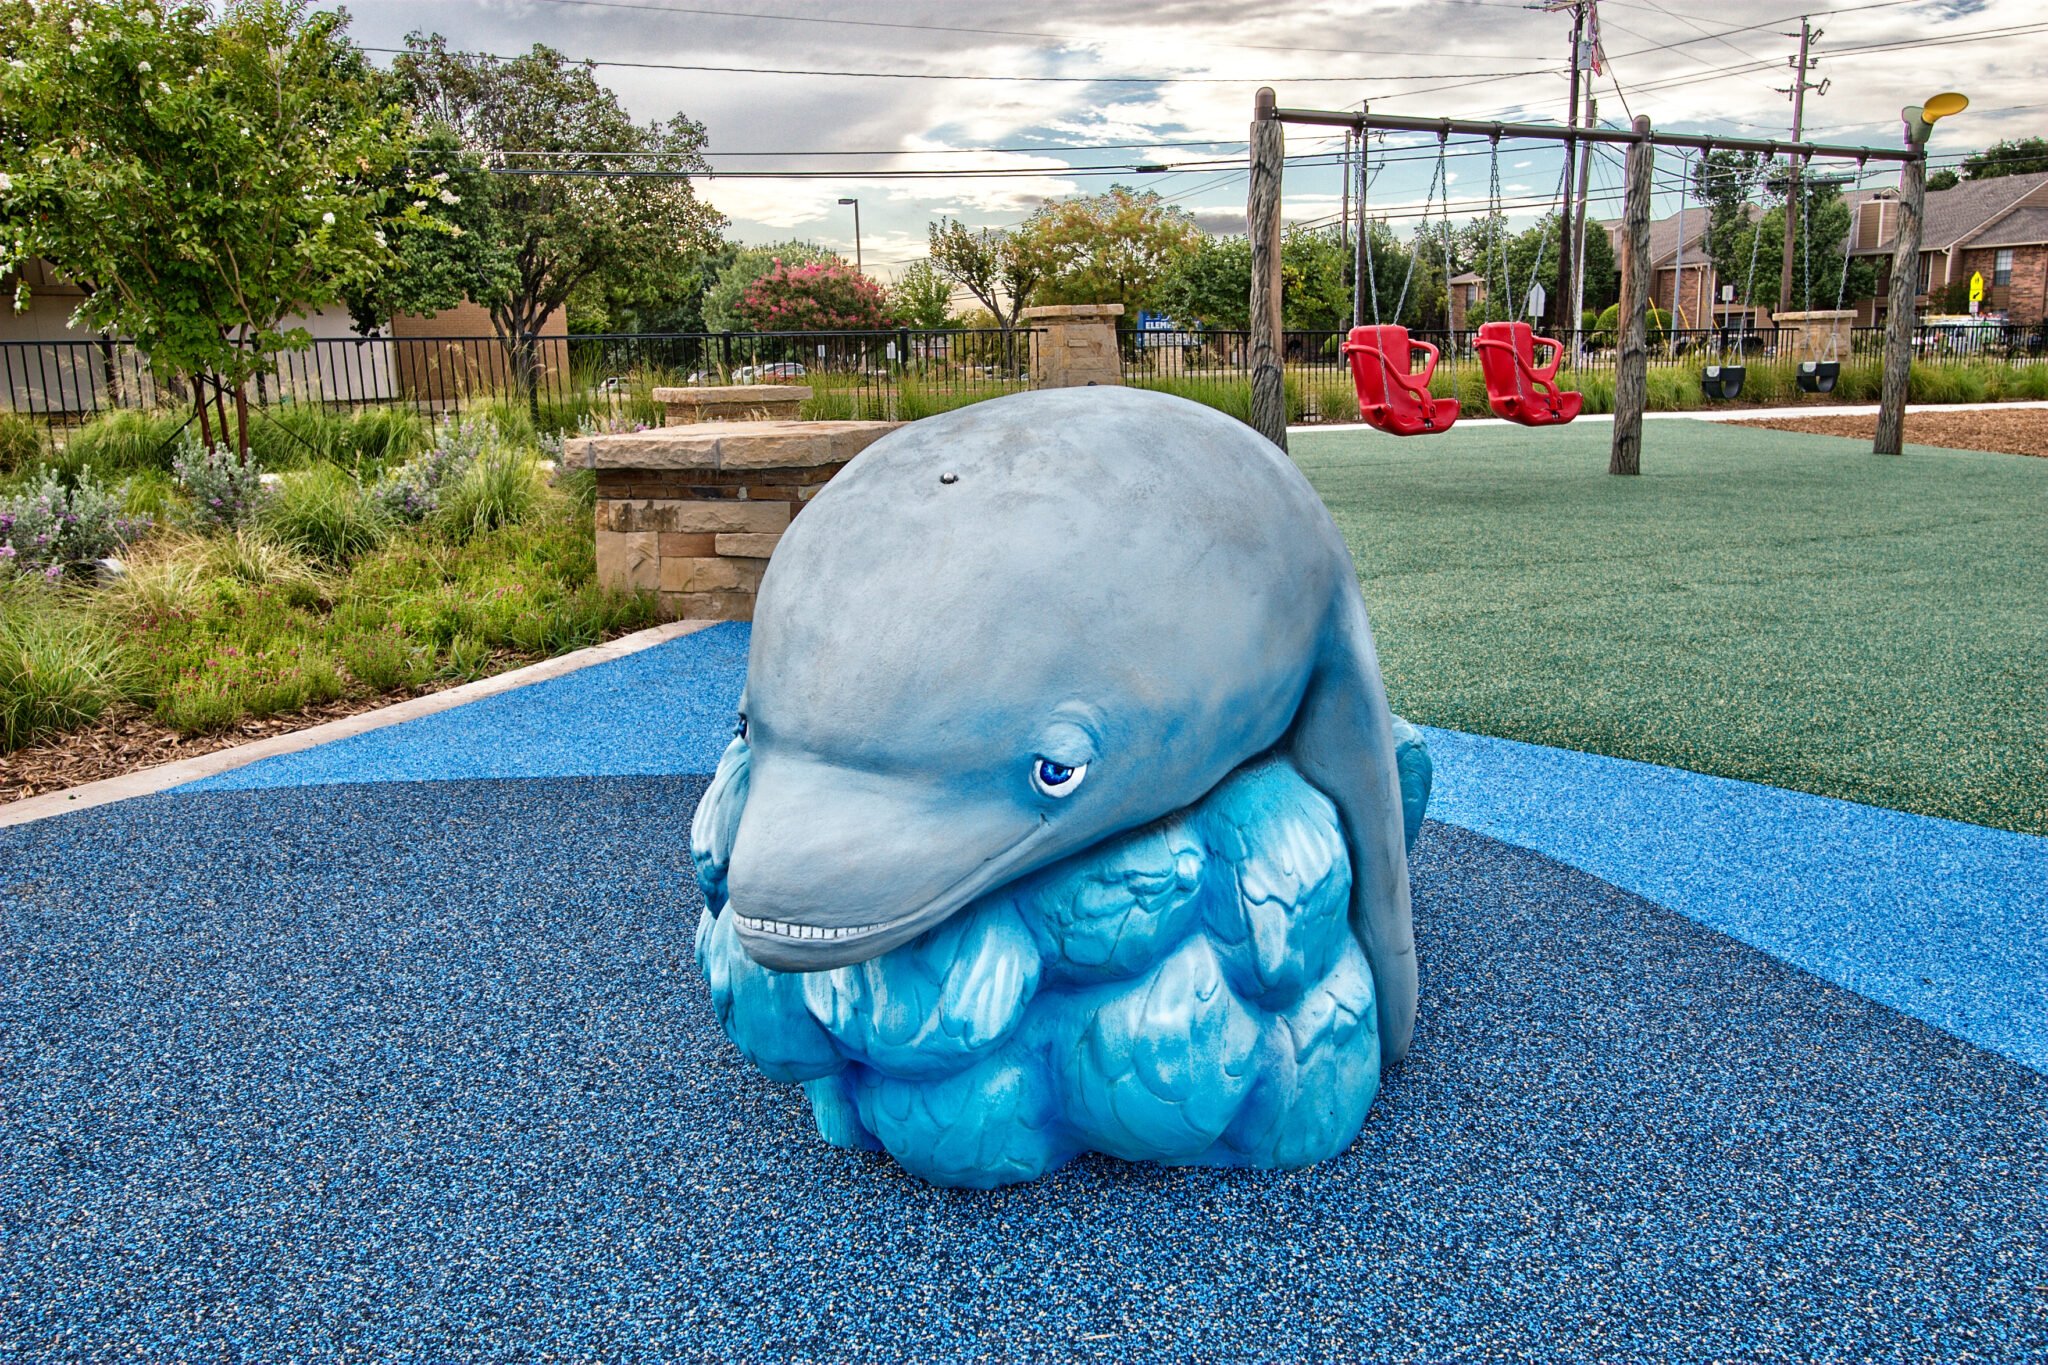 Porpoise at sea themed playground